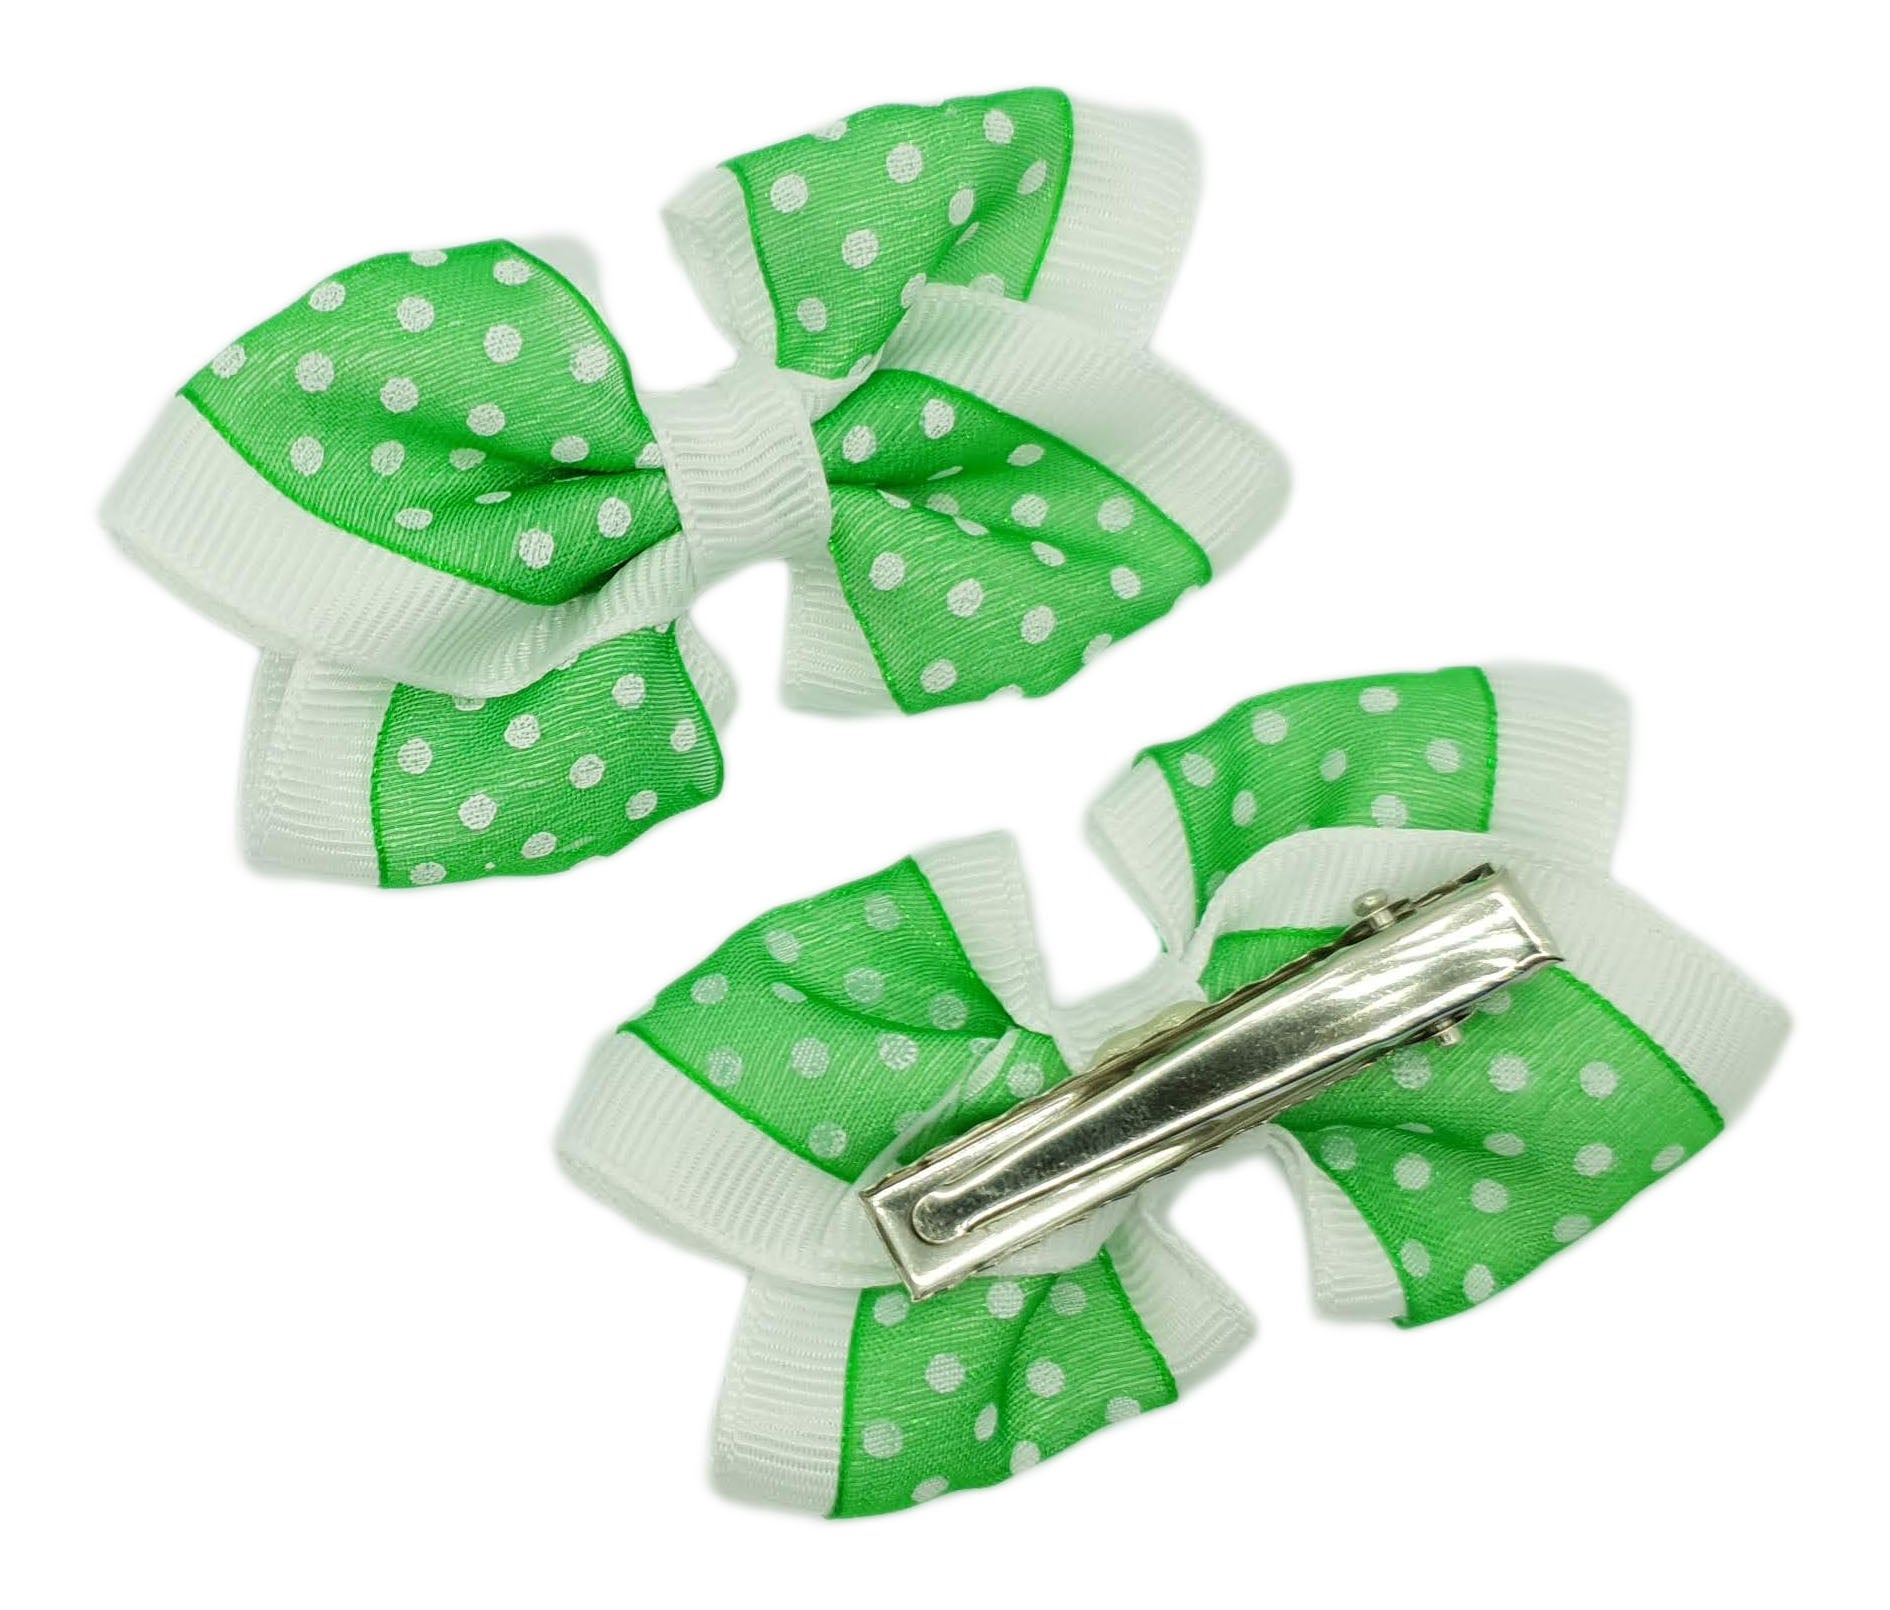 Emerald green and white polka dot bows on alligator clips